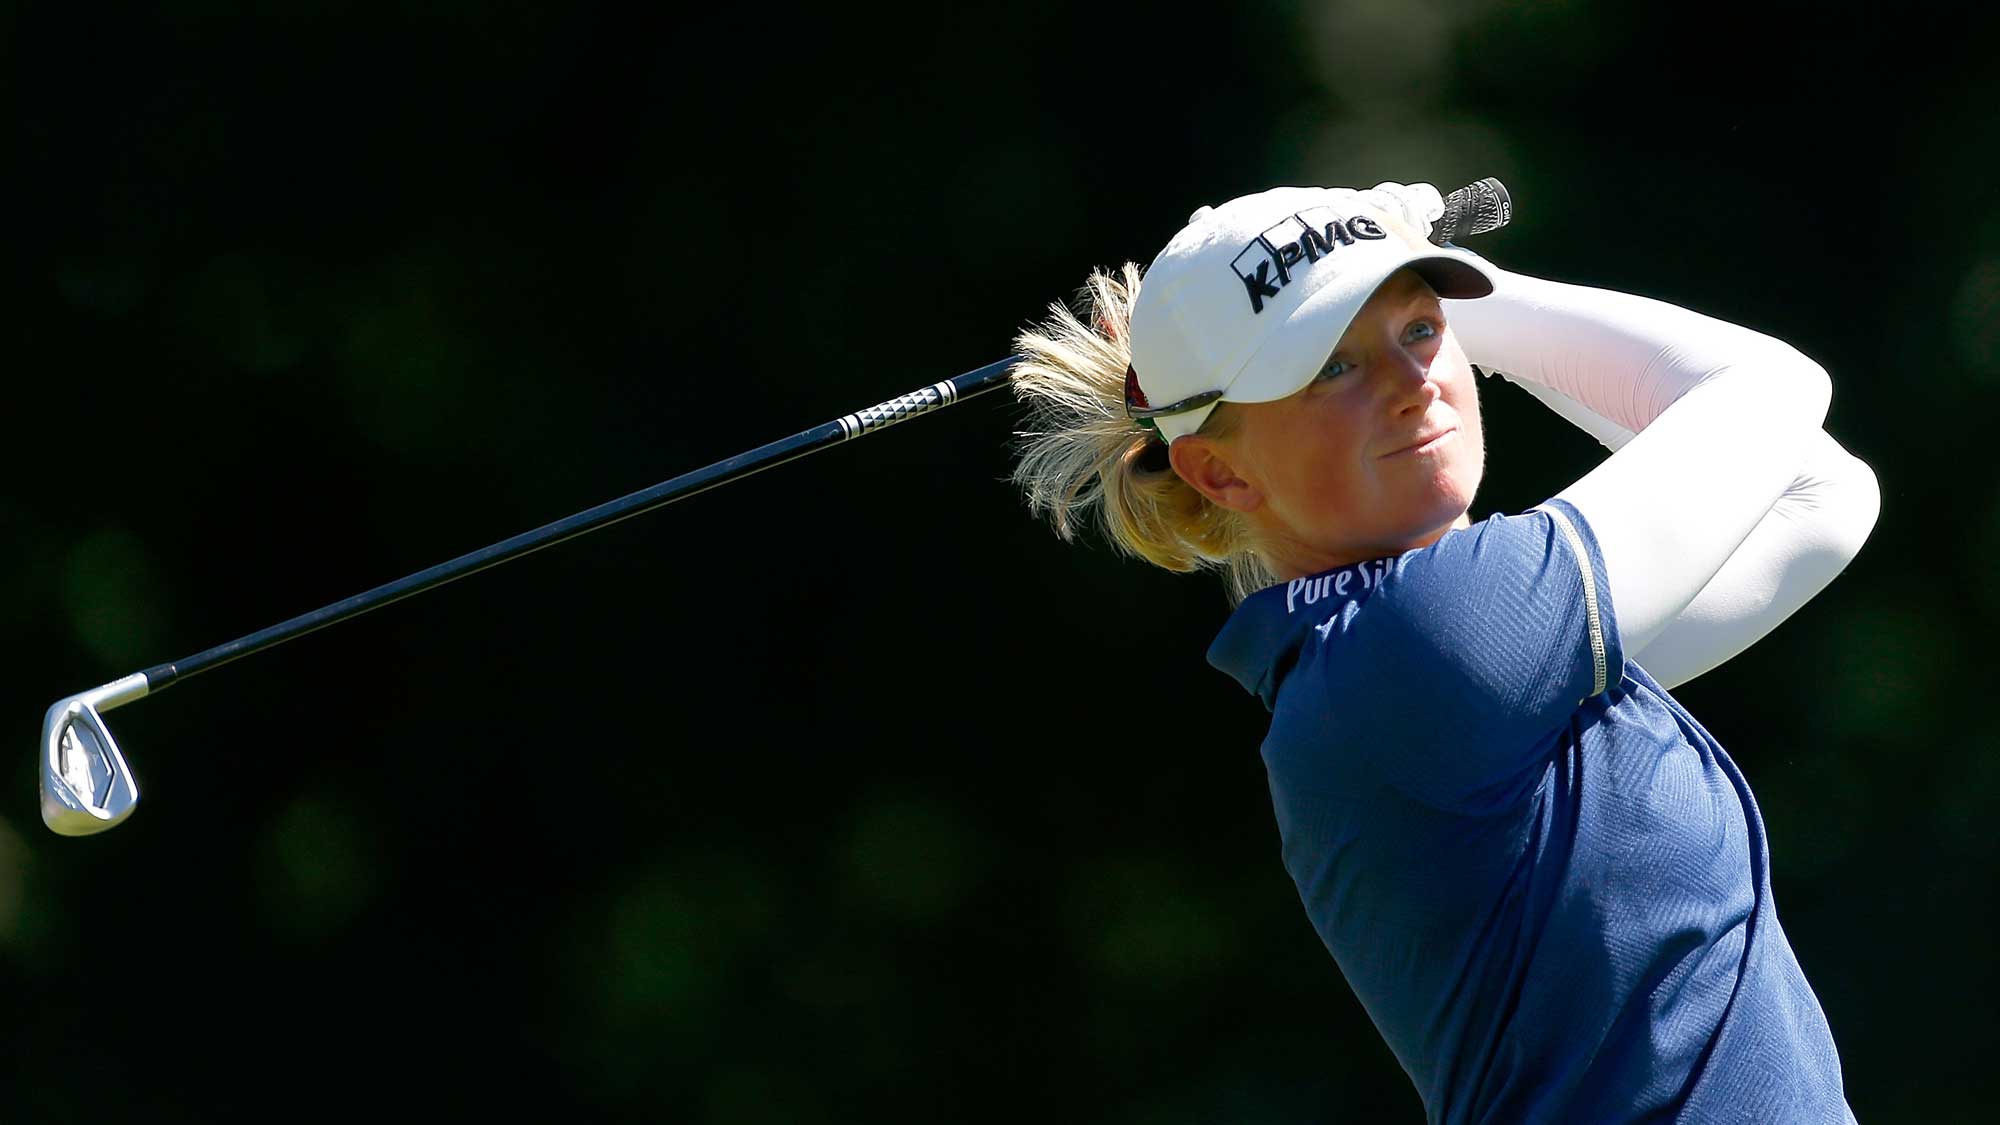 Stacy Lewis tees off on the 2nd hole during the third round of the LPGA Cambia Portland Classic